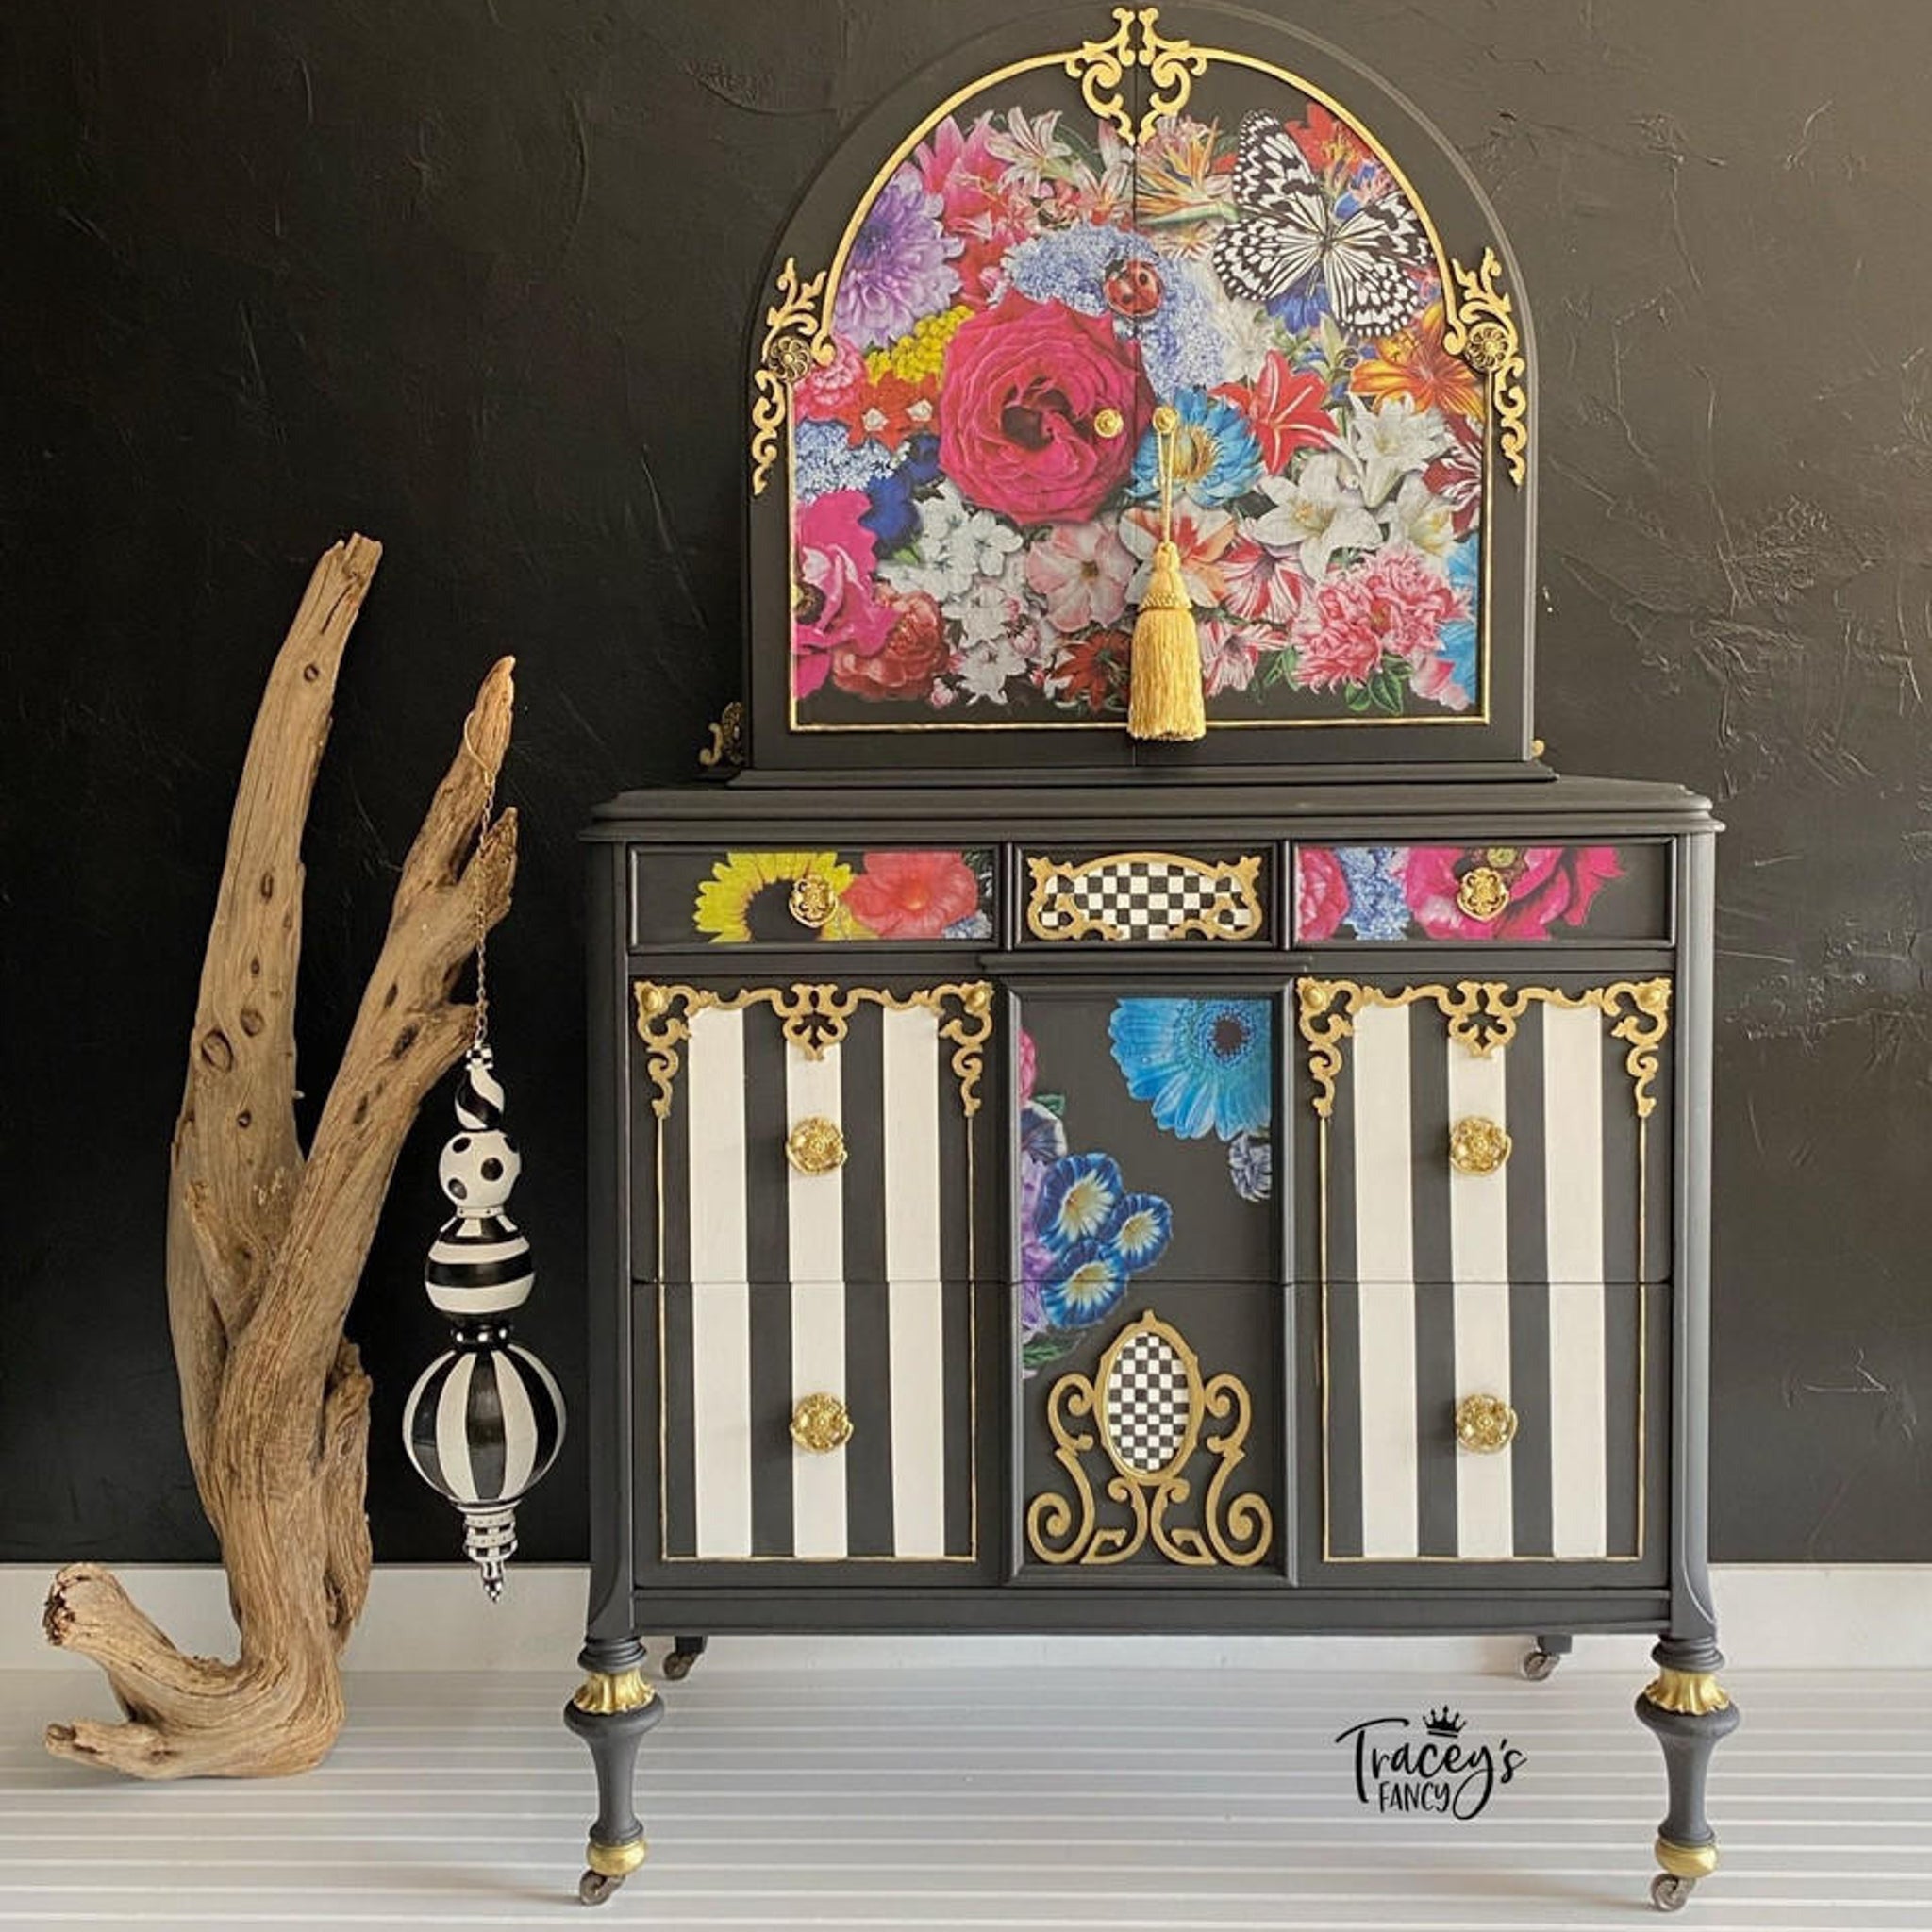 A vintage vanity dresser refurbished by Tracey's Fancy is painted black with white stripes on the drawers and features the Whimsical Wonderland Transfer on it.